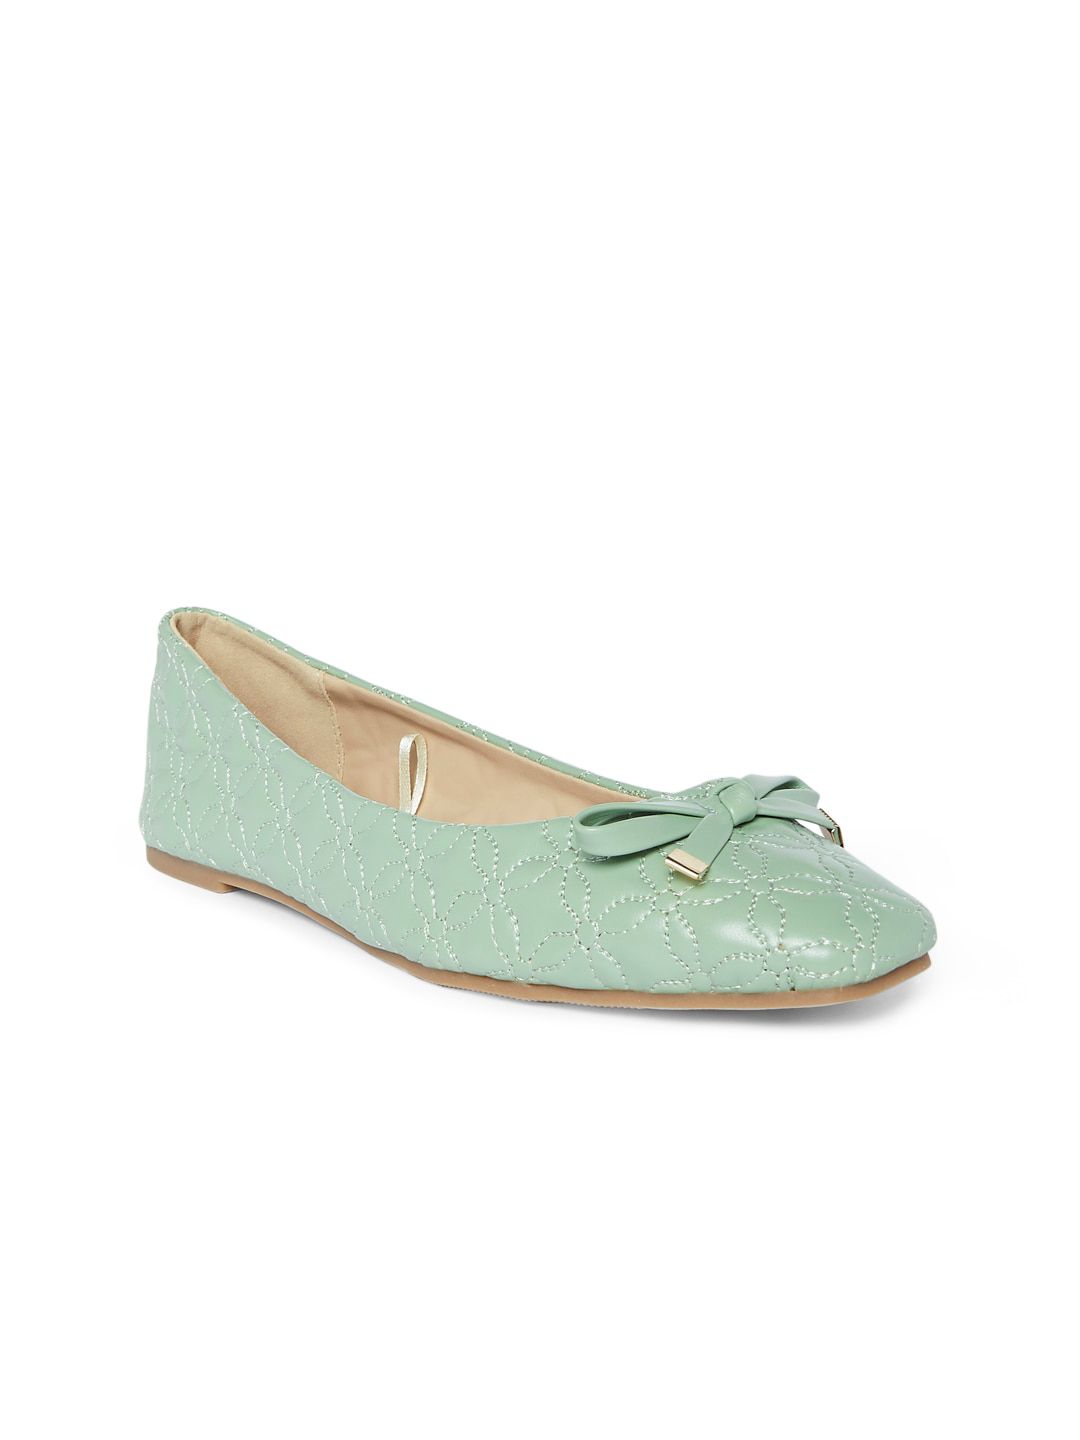 Forever Glam by Pantaloons Woman Green Ballerinas with Bows Flats Price in India